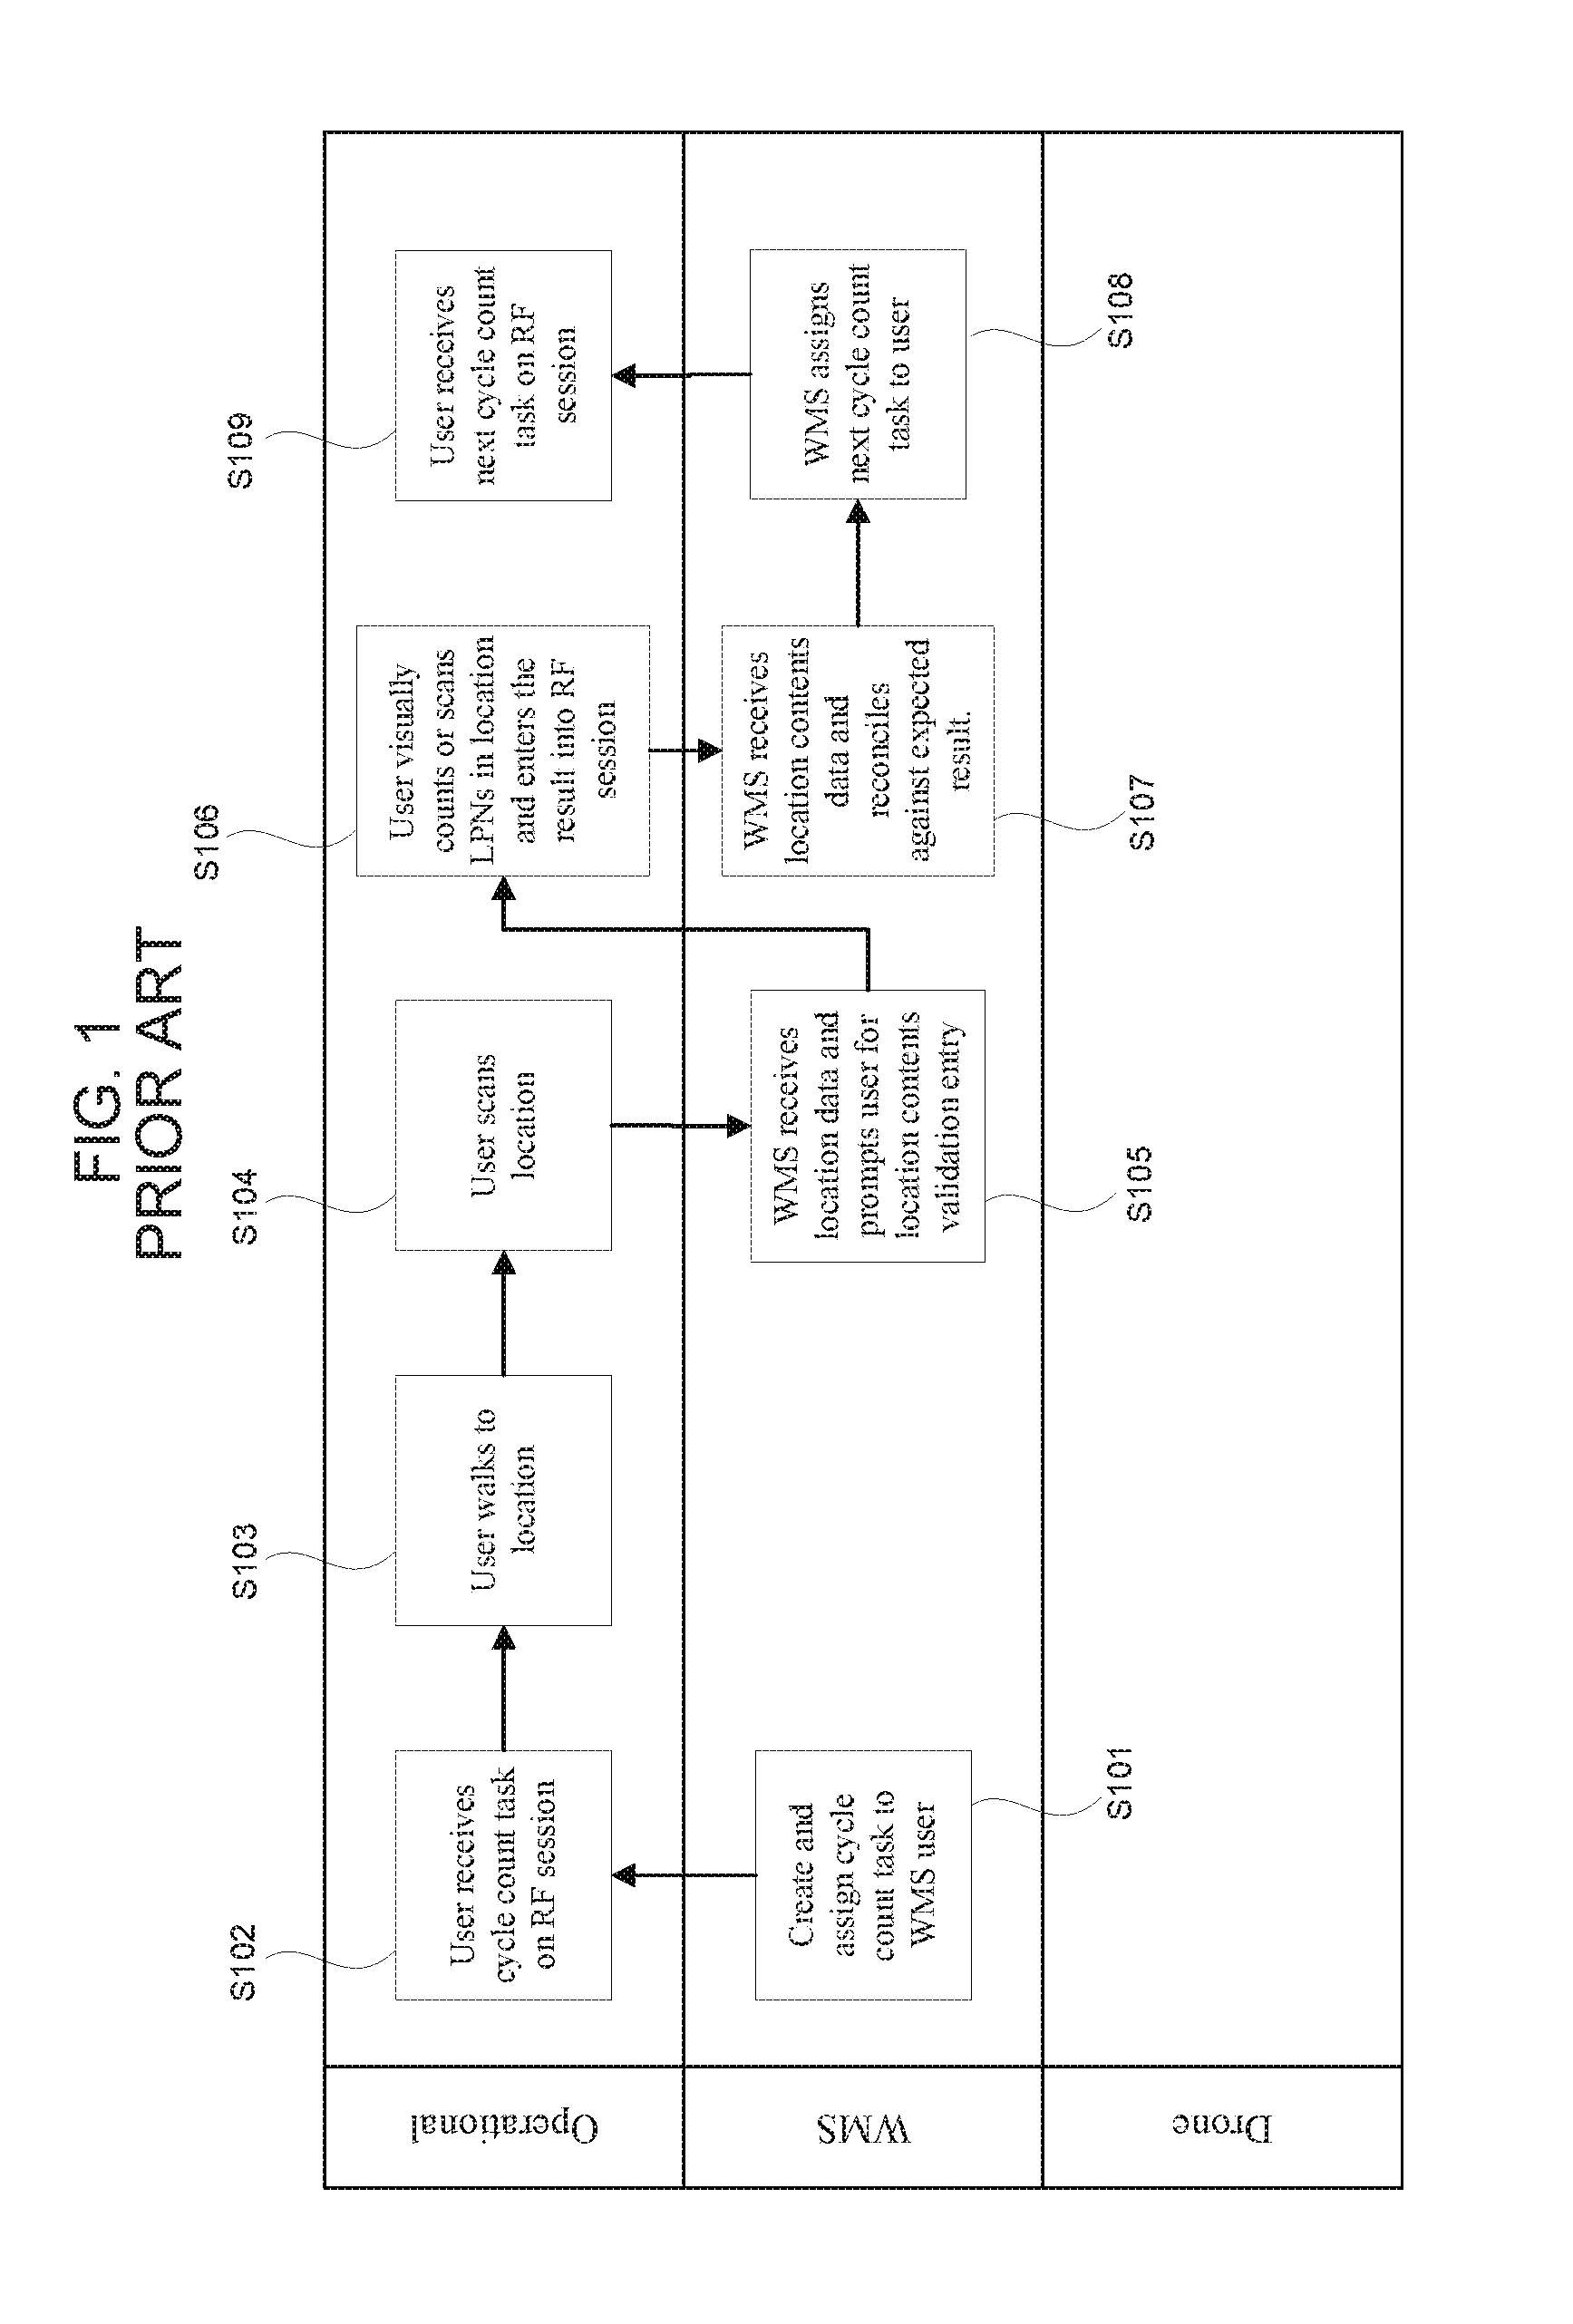 Method and apparatus for warehouse cycle counting using a drone